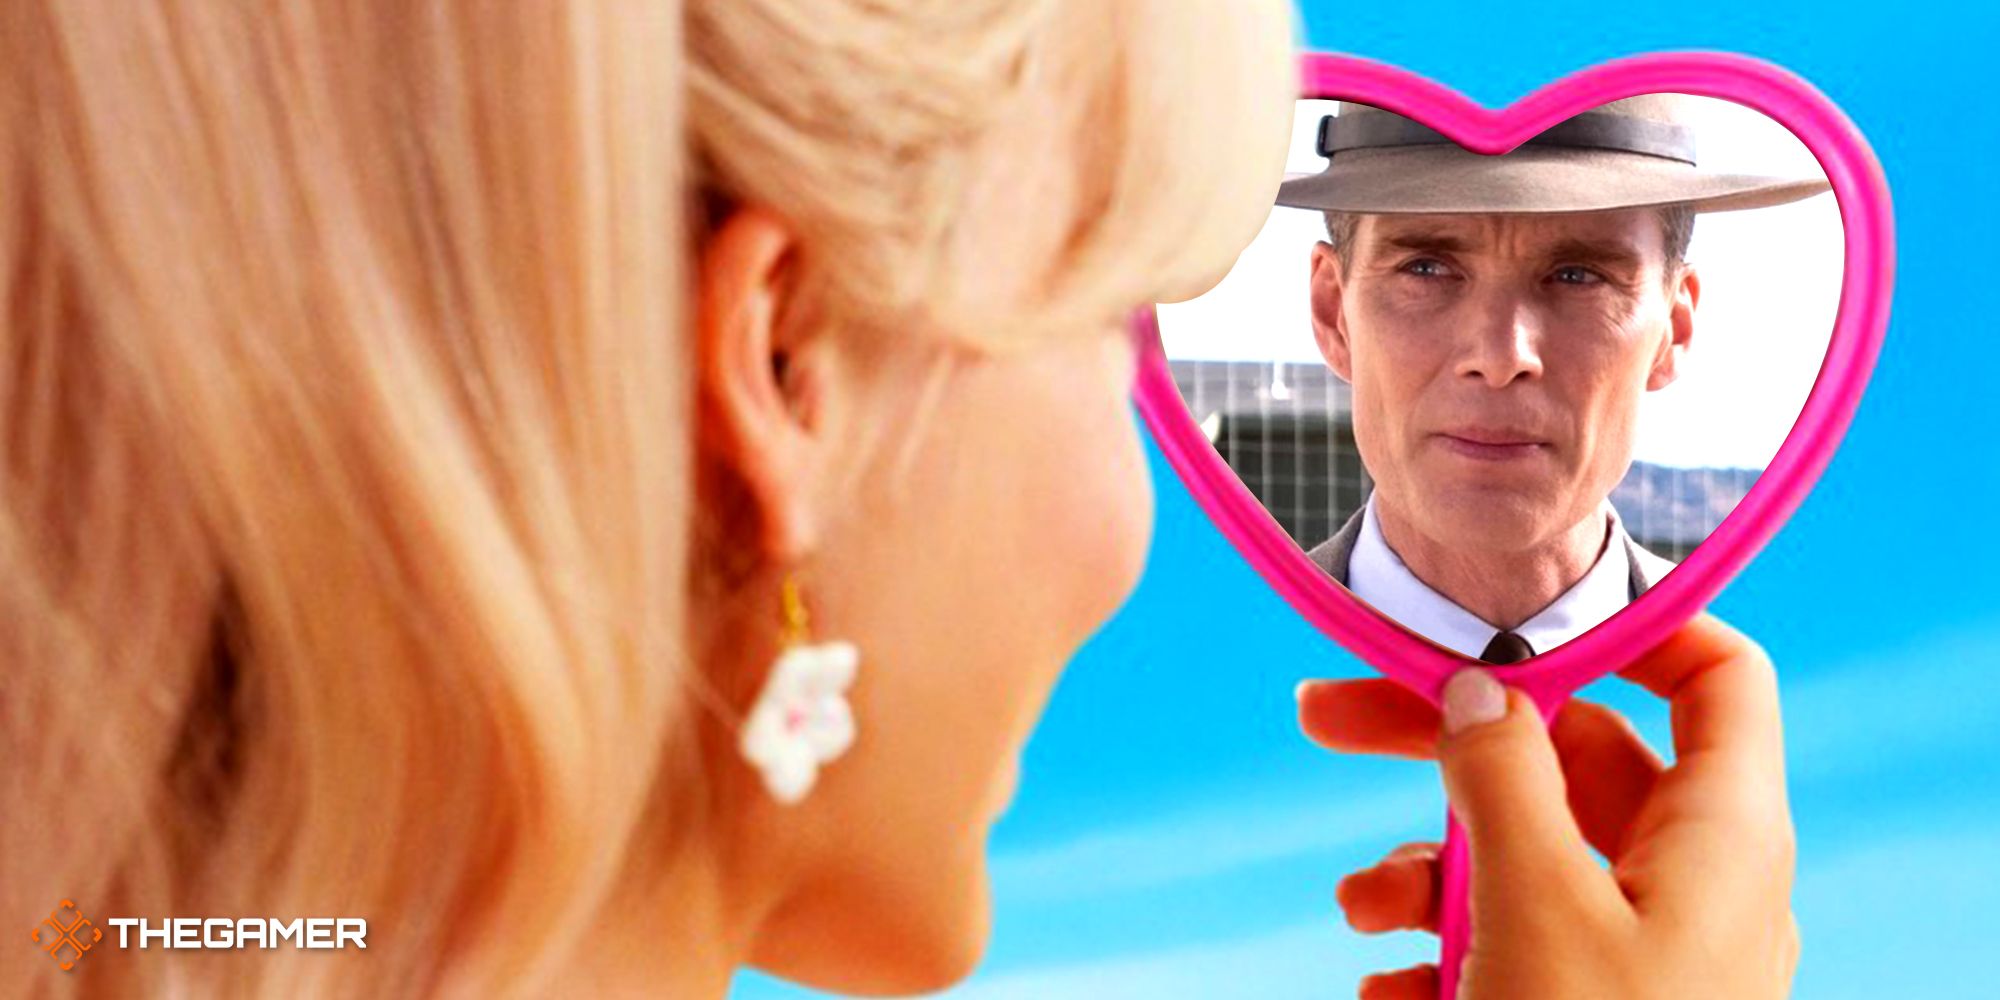 Barbie looking at Oppenheimer in a heart-shaped mirror